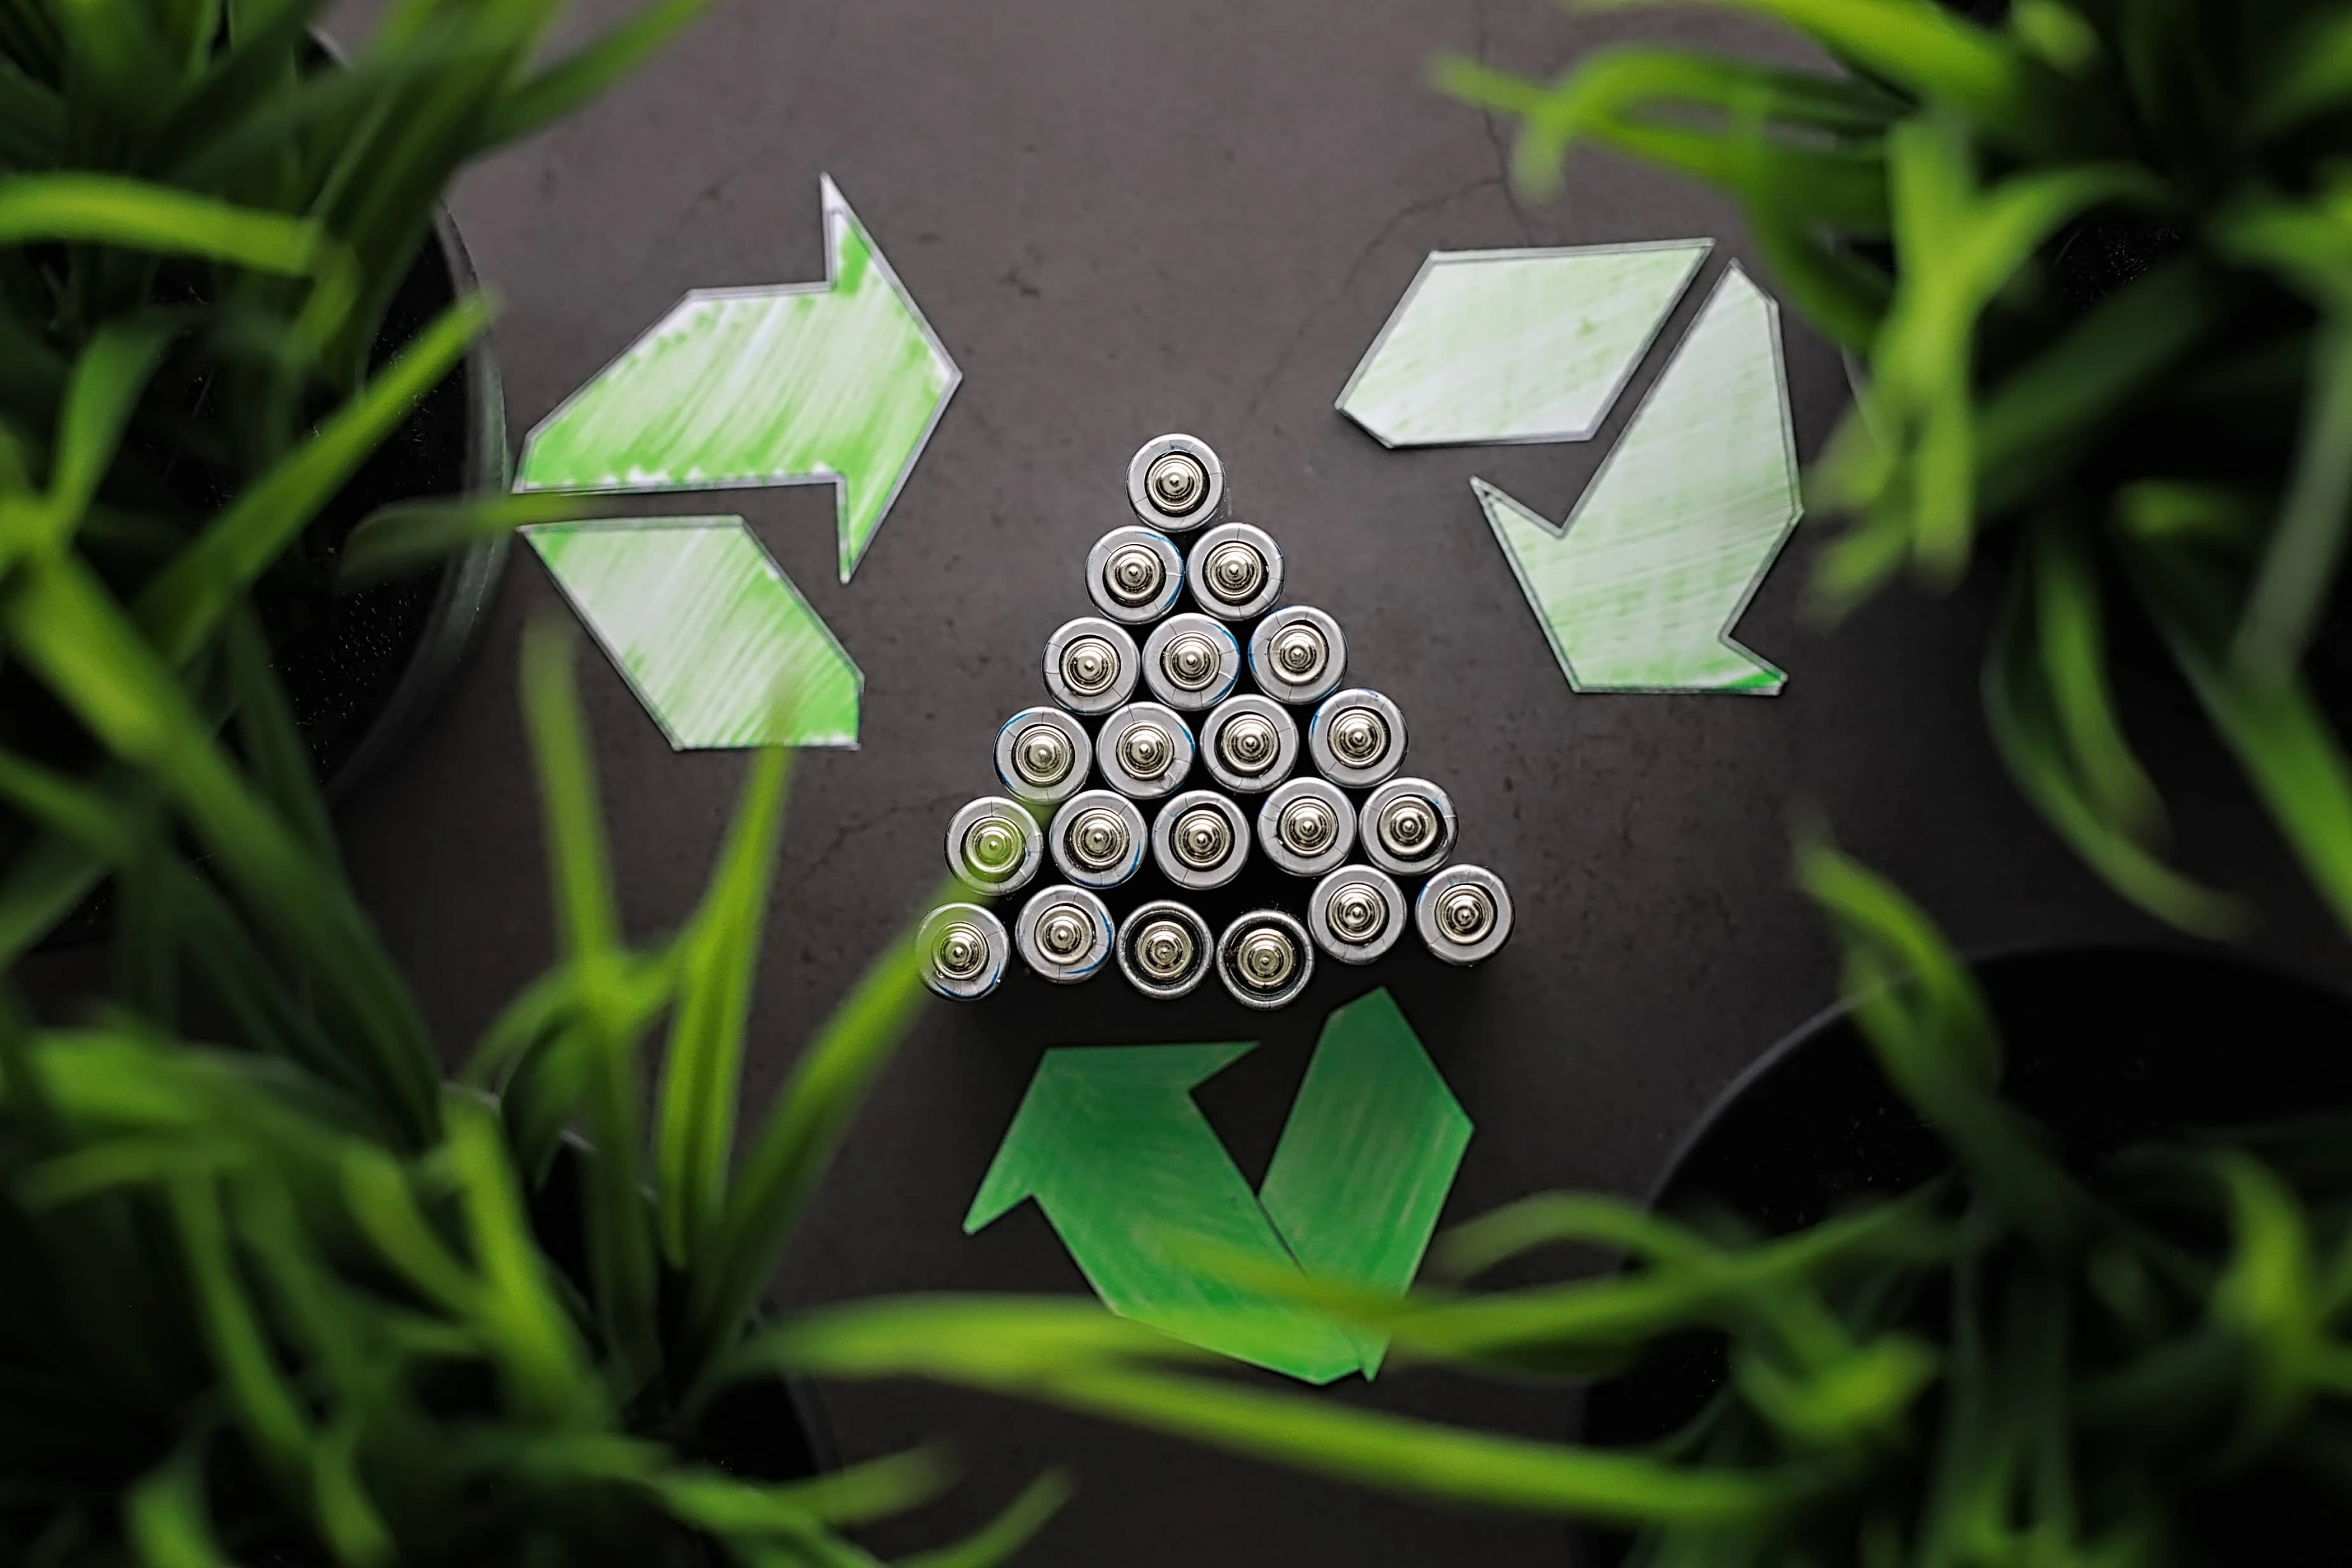 Sustainability of batteries